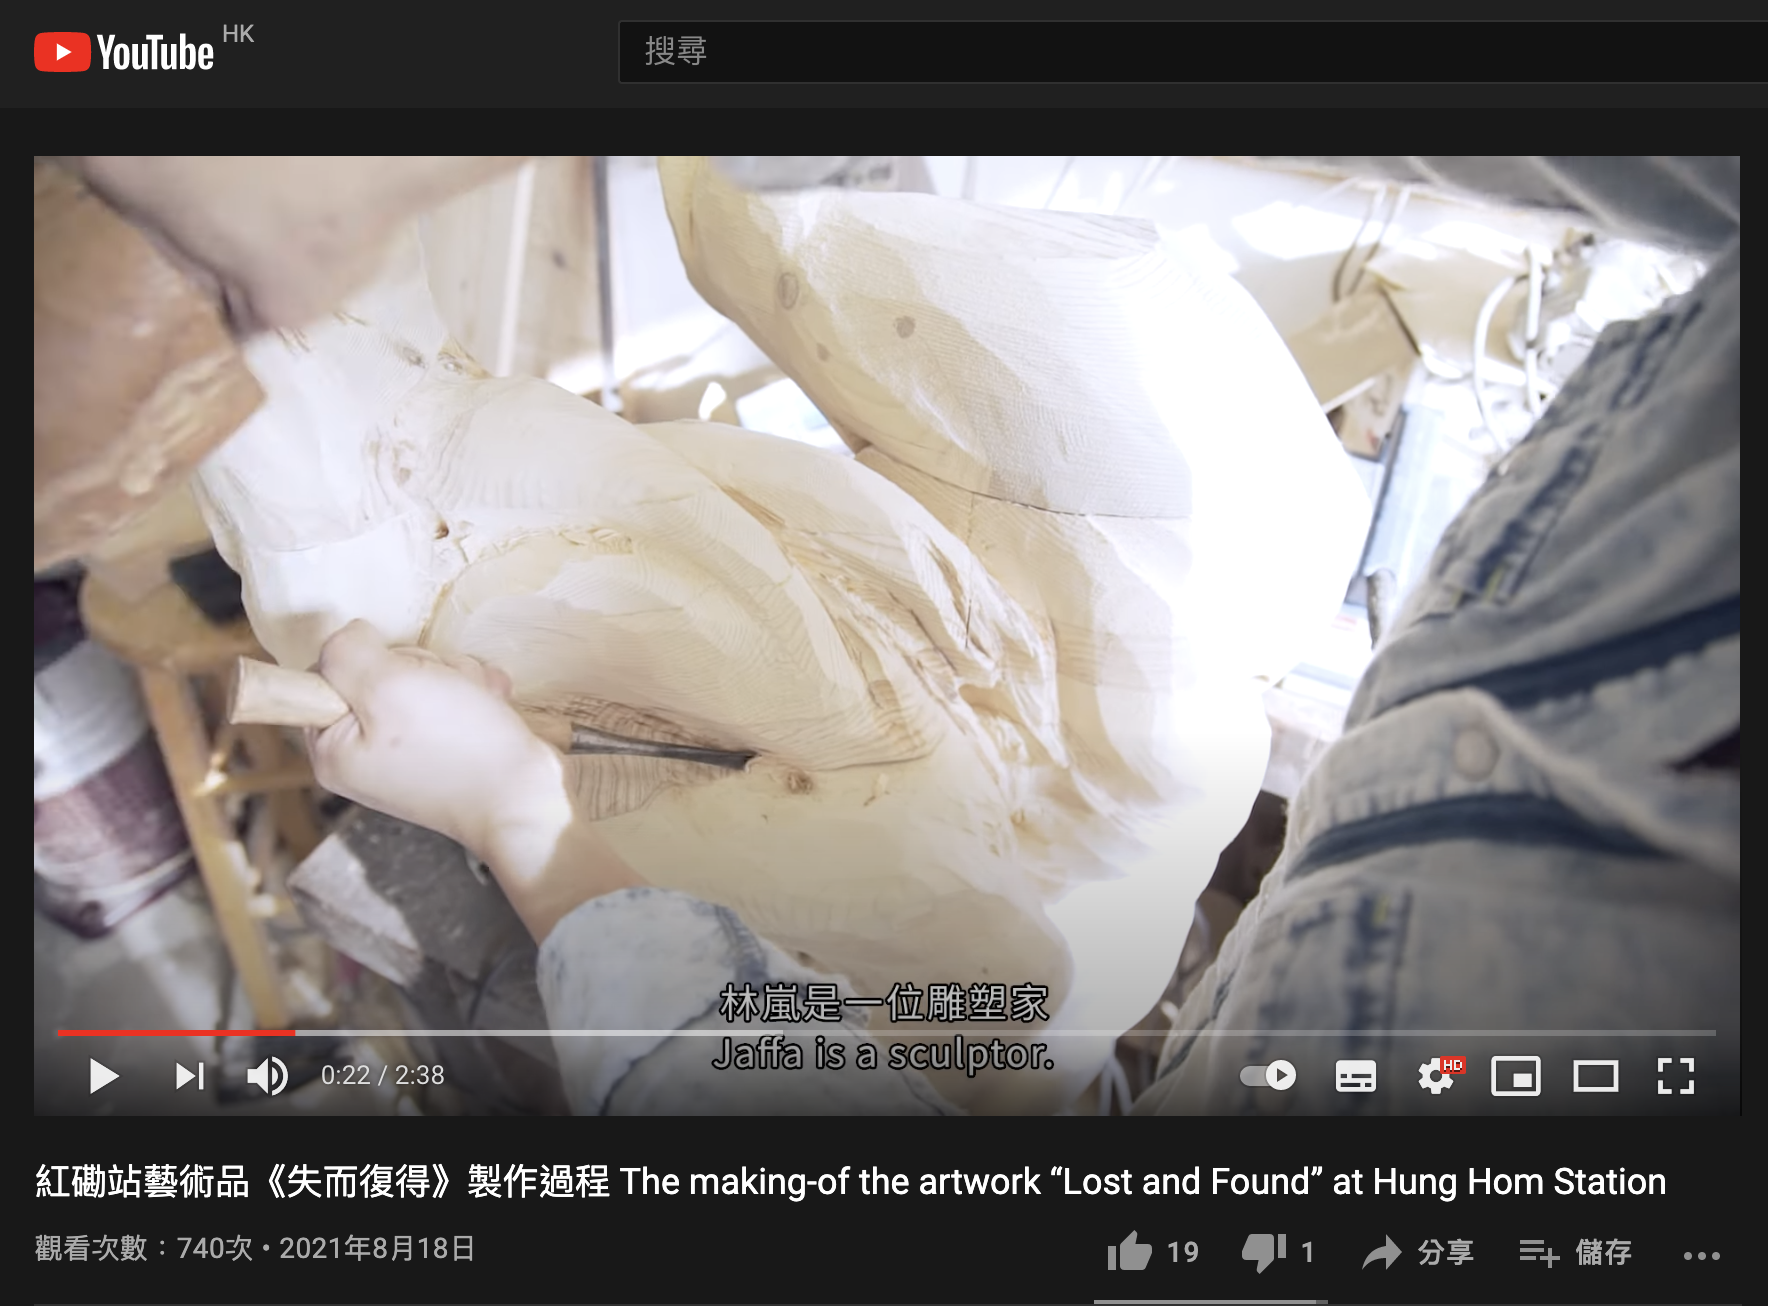 The making-of the artwork “Lost and Found” at Hung Hom Station